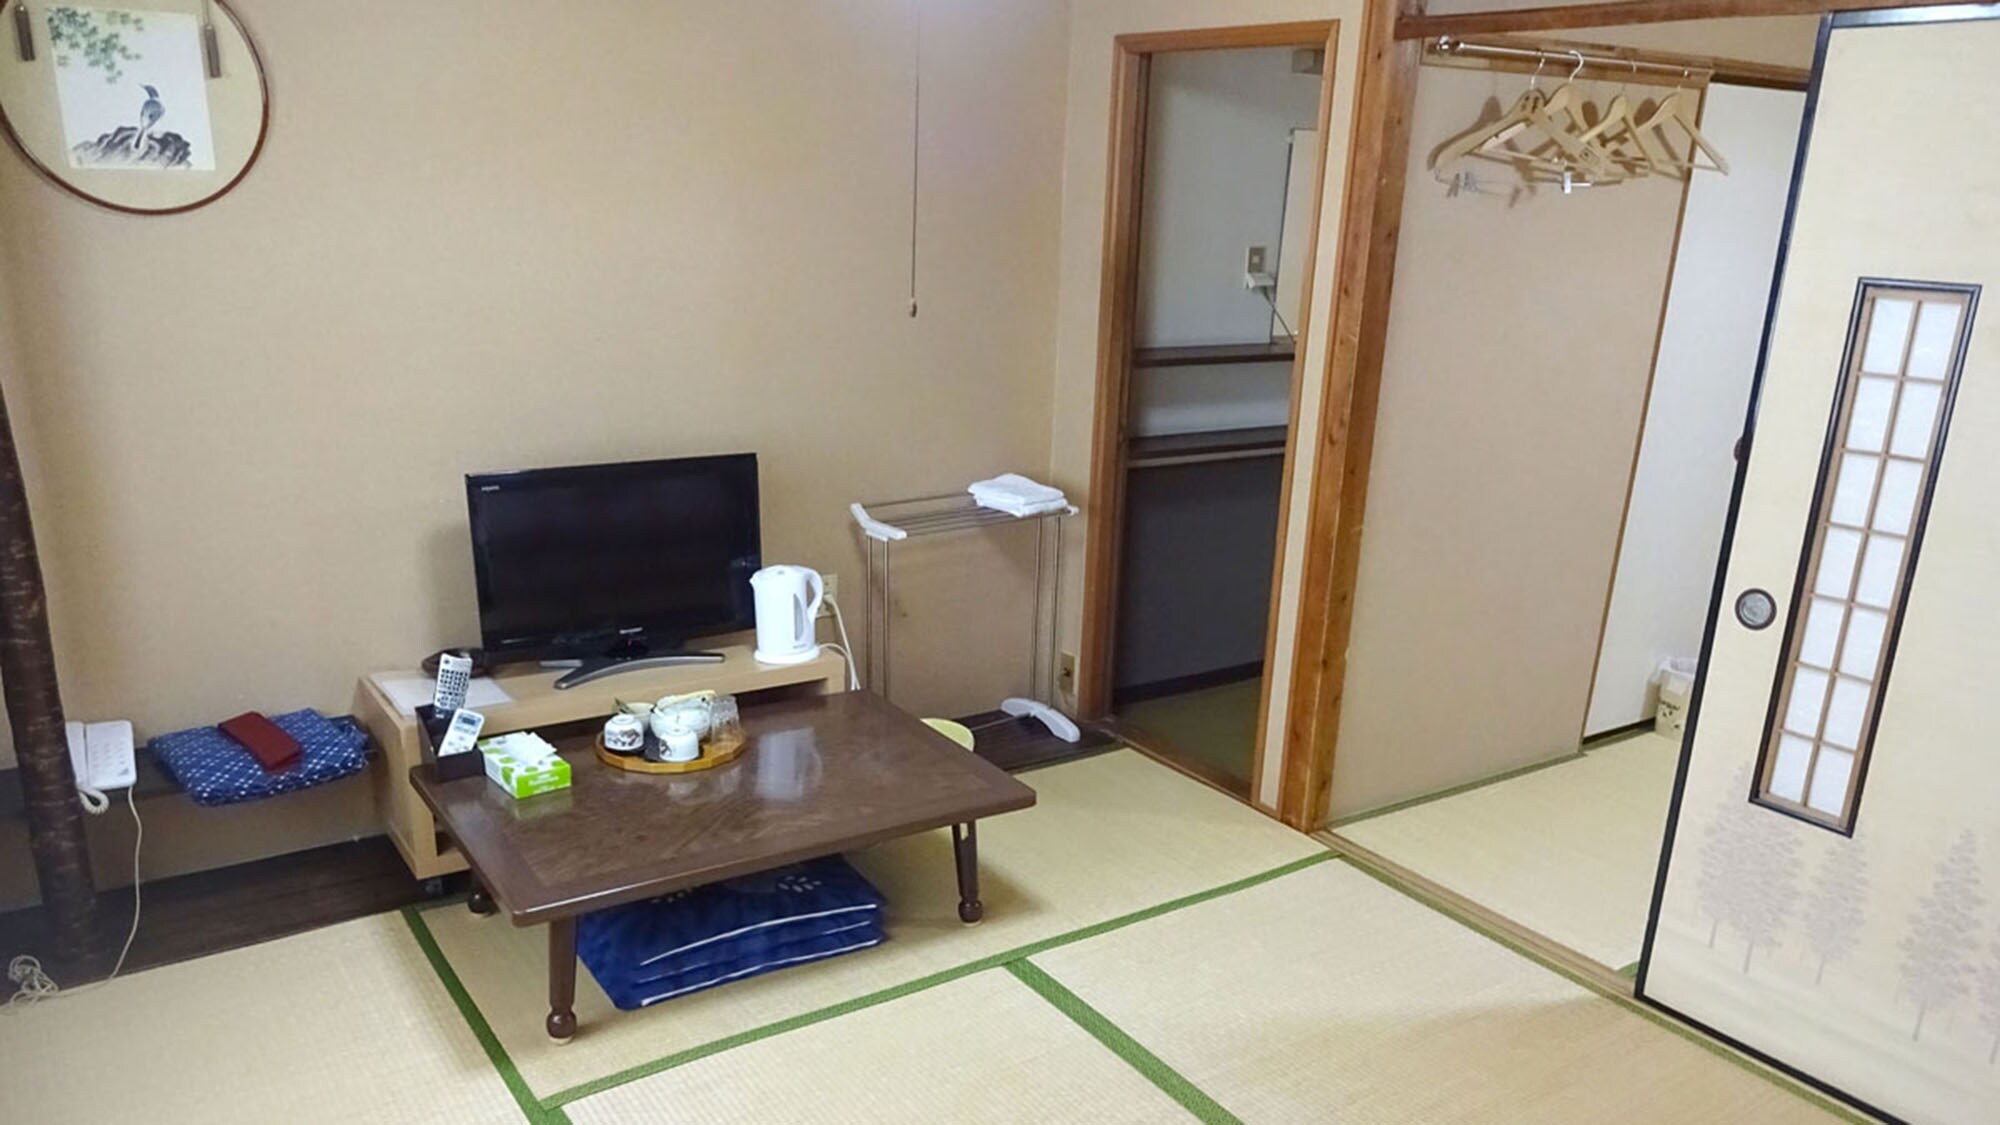 ・ [Japanese-style room with 10 tatami mats] Up to 4 people can stay. Please relax in the tatami room